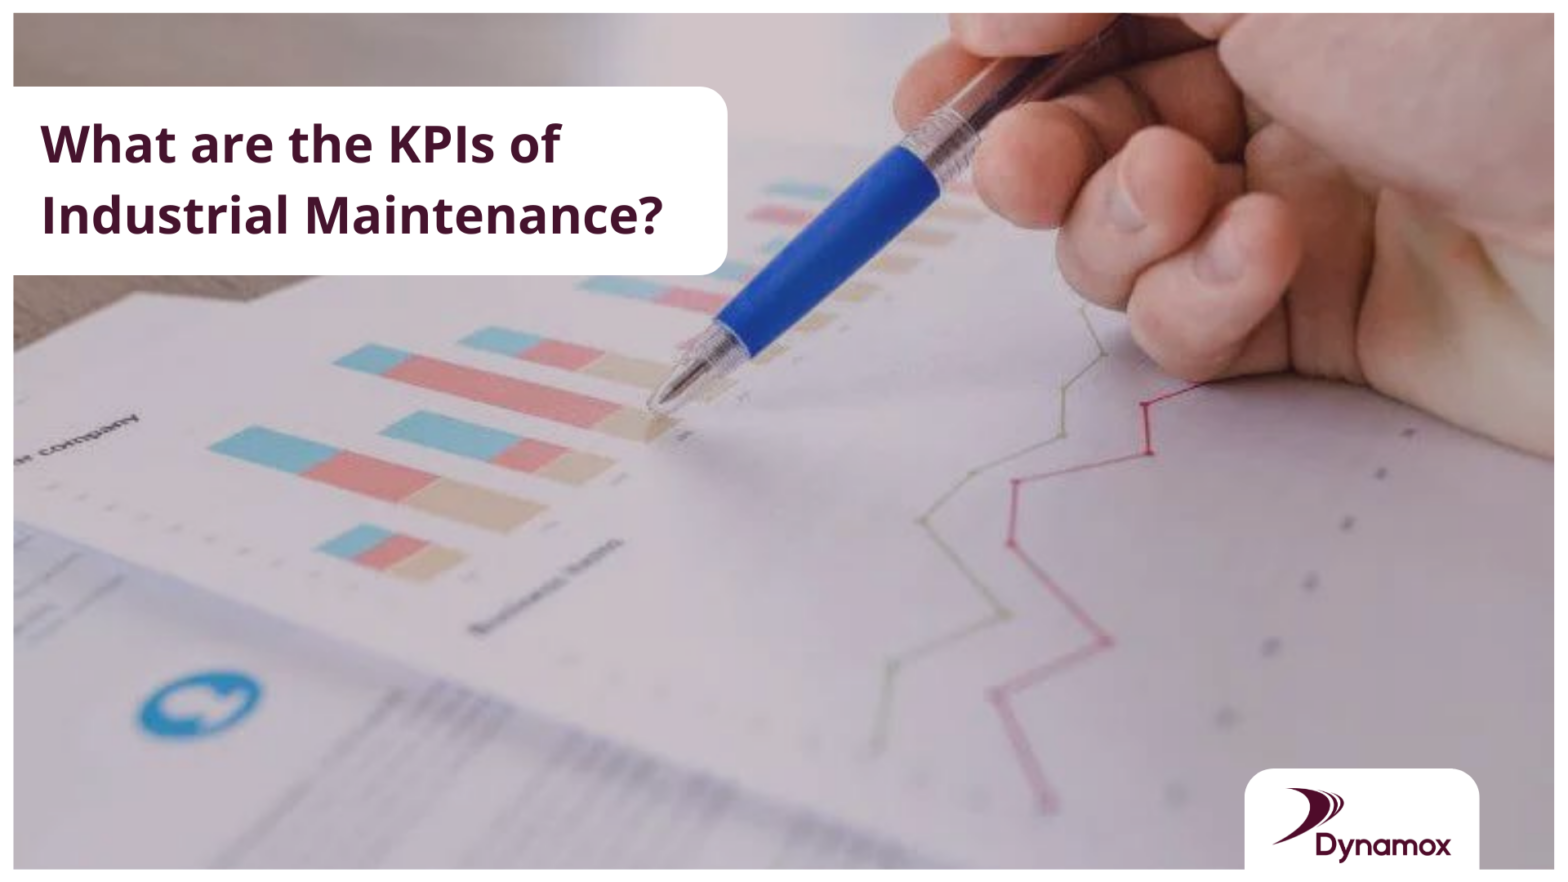 What are the KPIs of Industrial Maintenance?